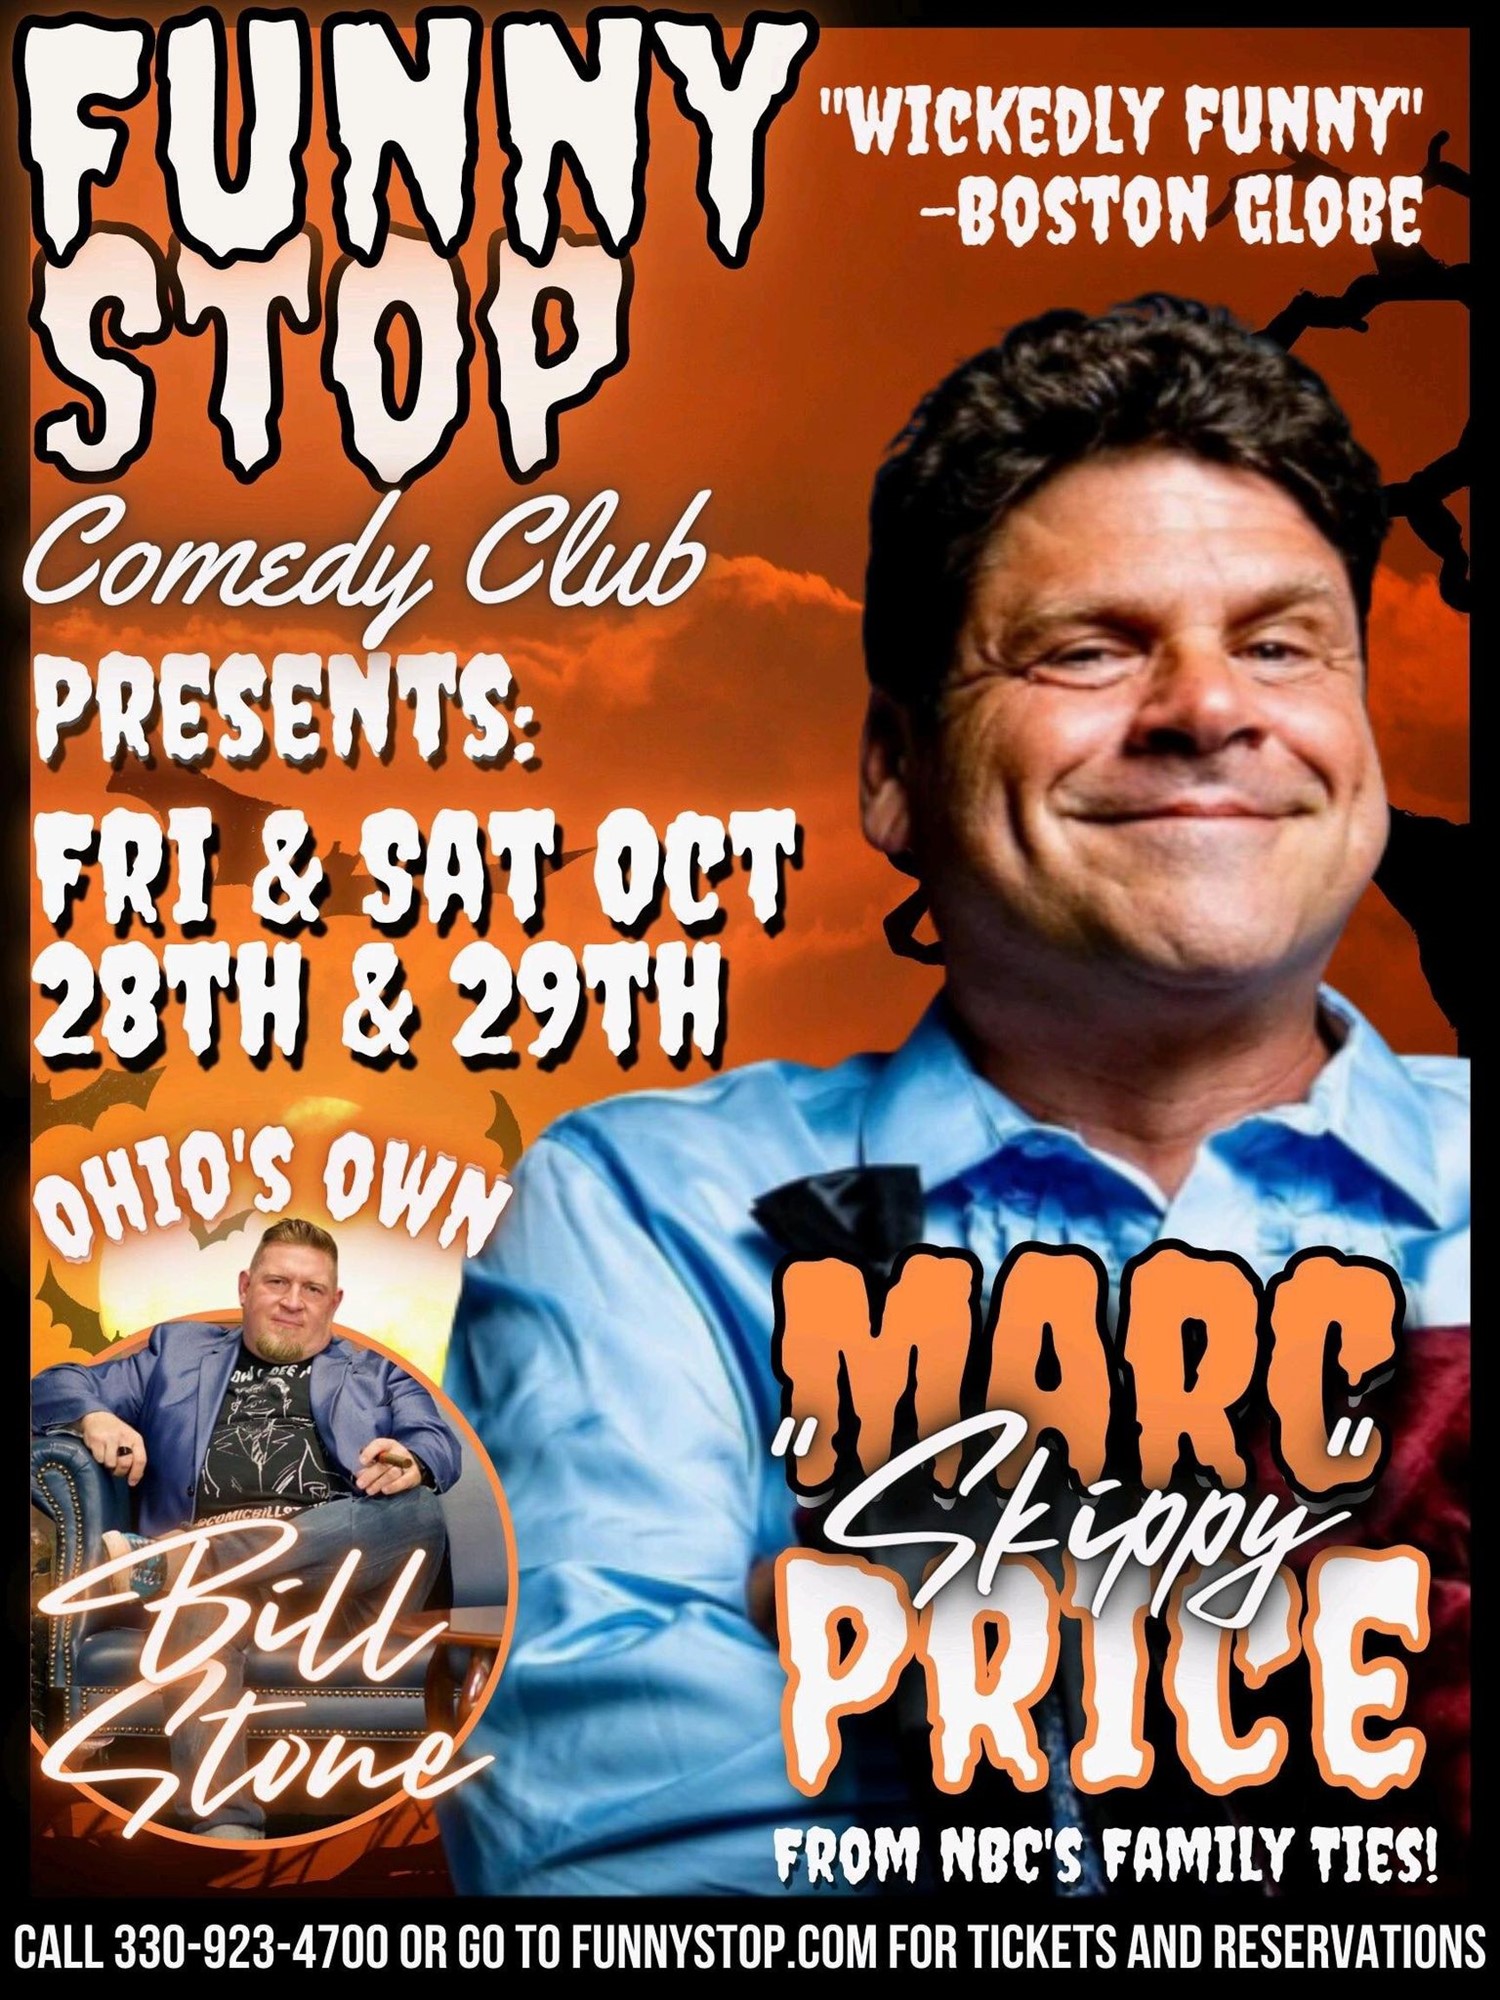 Marc (Skippy) Price Sat. 7:20 Show Funny Stop Comedy Club on oct. 29, 19:20@Funny Stop Comedy Club - Buy tickets and Get information on Funny Stop funnystop.online